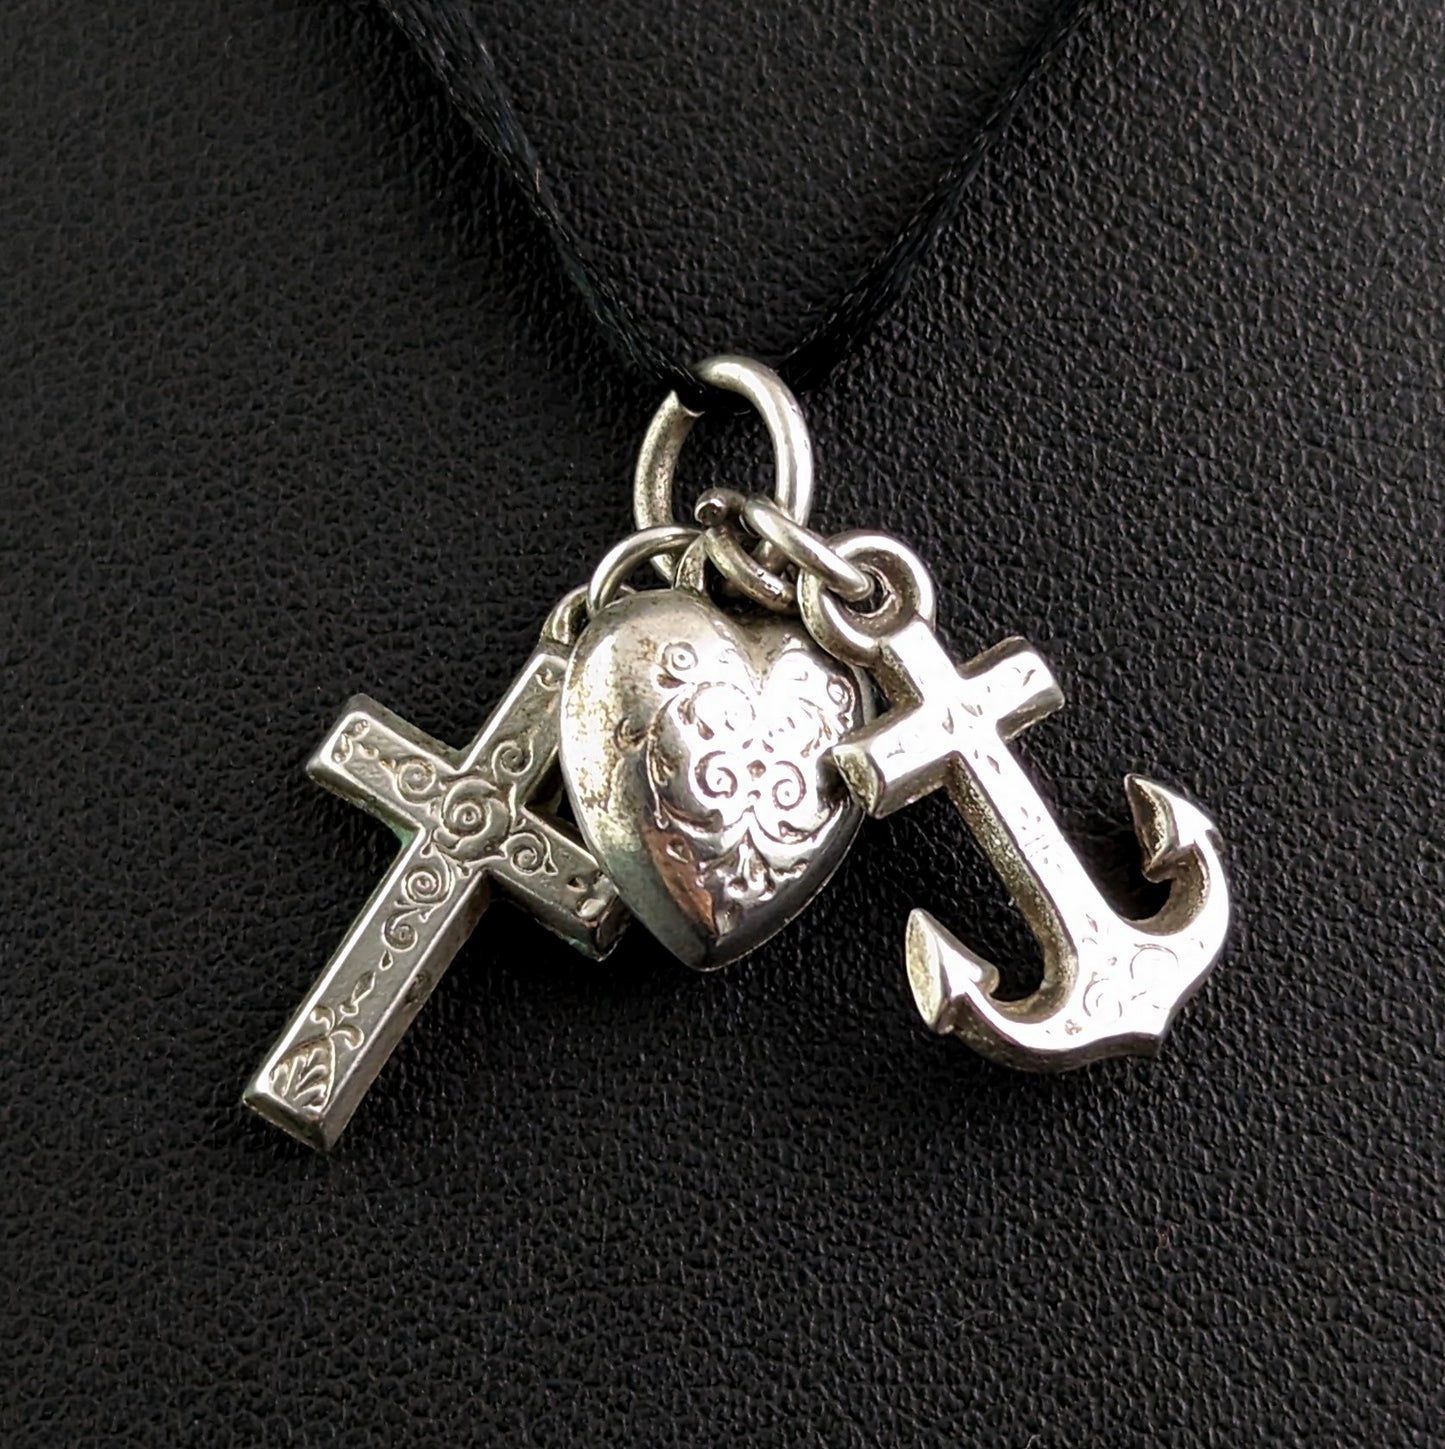 Antique Faith, Hope and Charity charm, Pendant, Sterling silver, Victorian